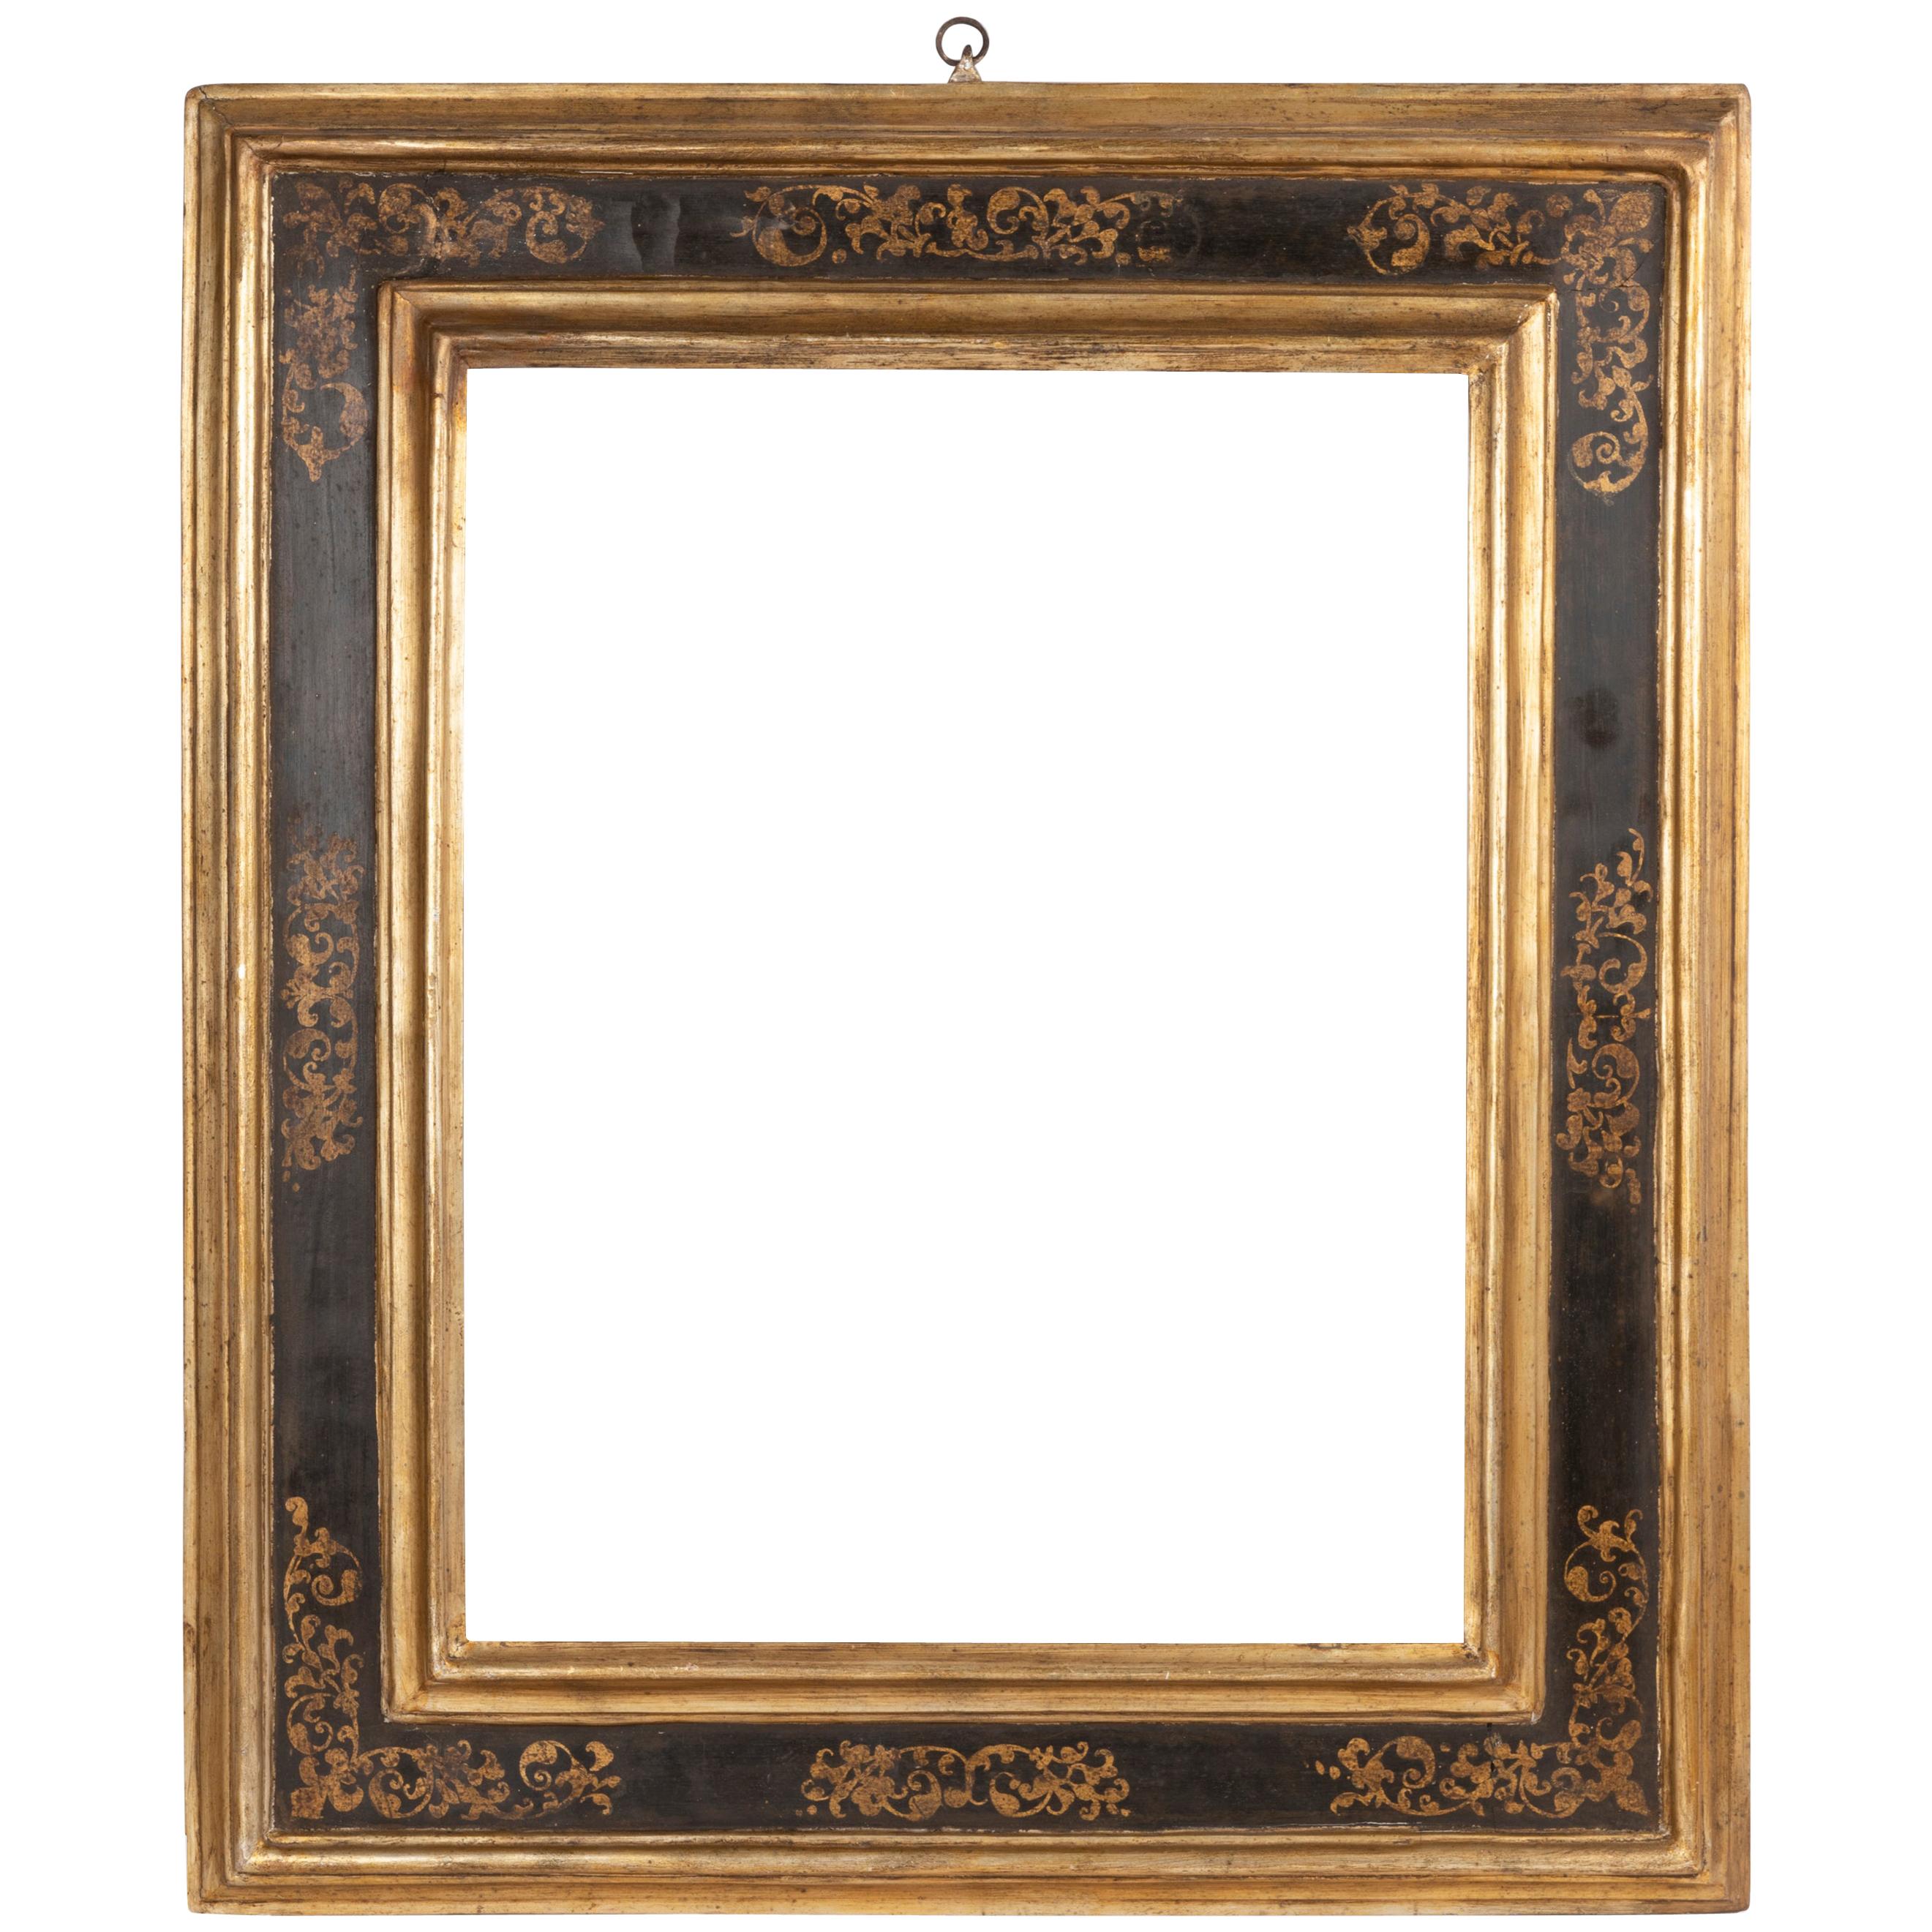 Exceptional 19th Century Carved Painted Giltwood Italian Frame or Mirror, Italy